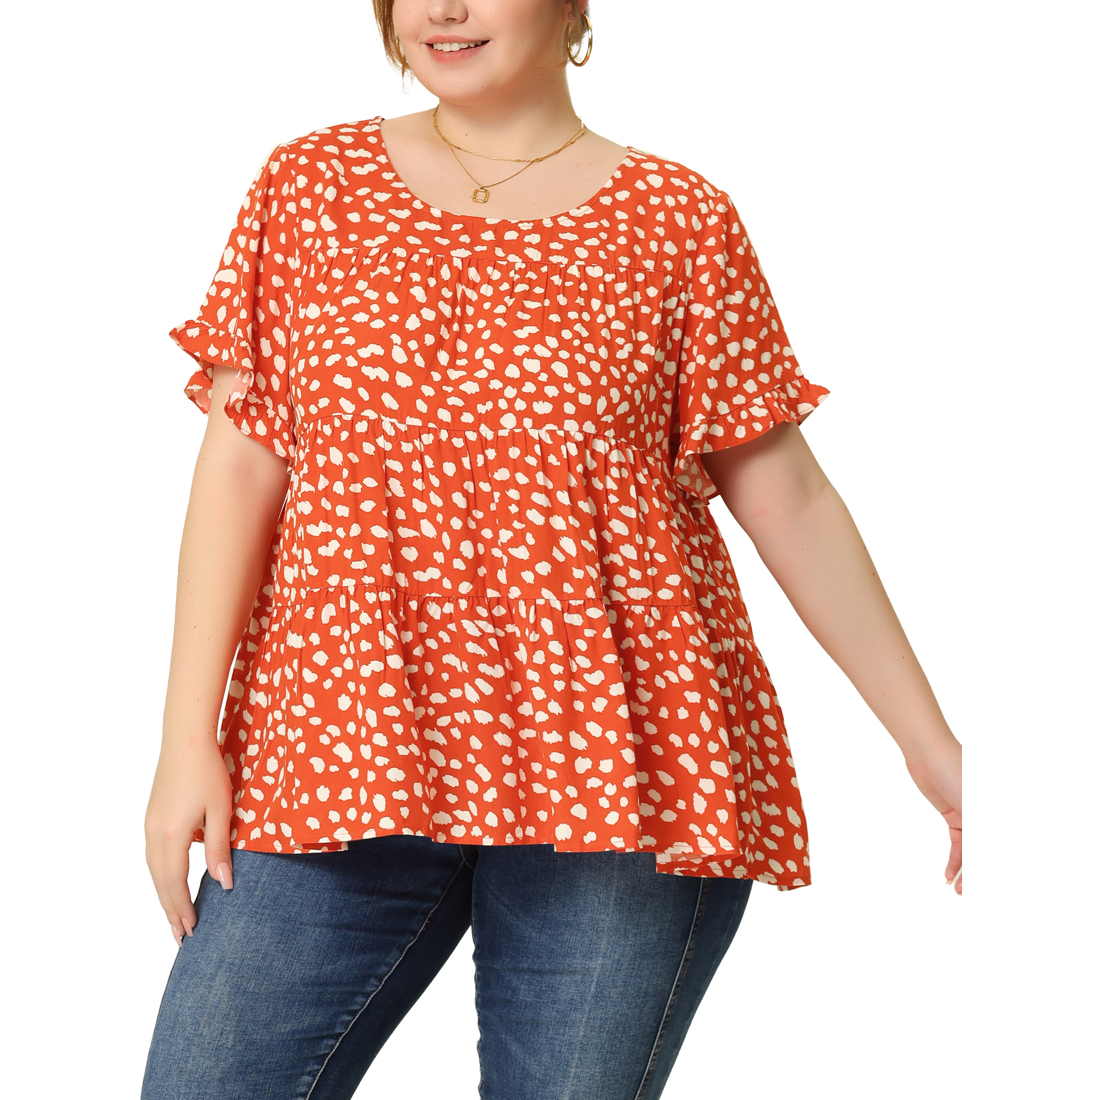 Unique Bargains Plus Size Polka Dots Blouses for Women Round Neck 3/4 Ruffle Sleeve Tiered Peplum Tops